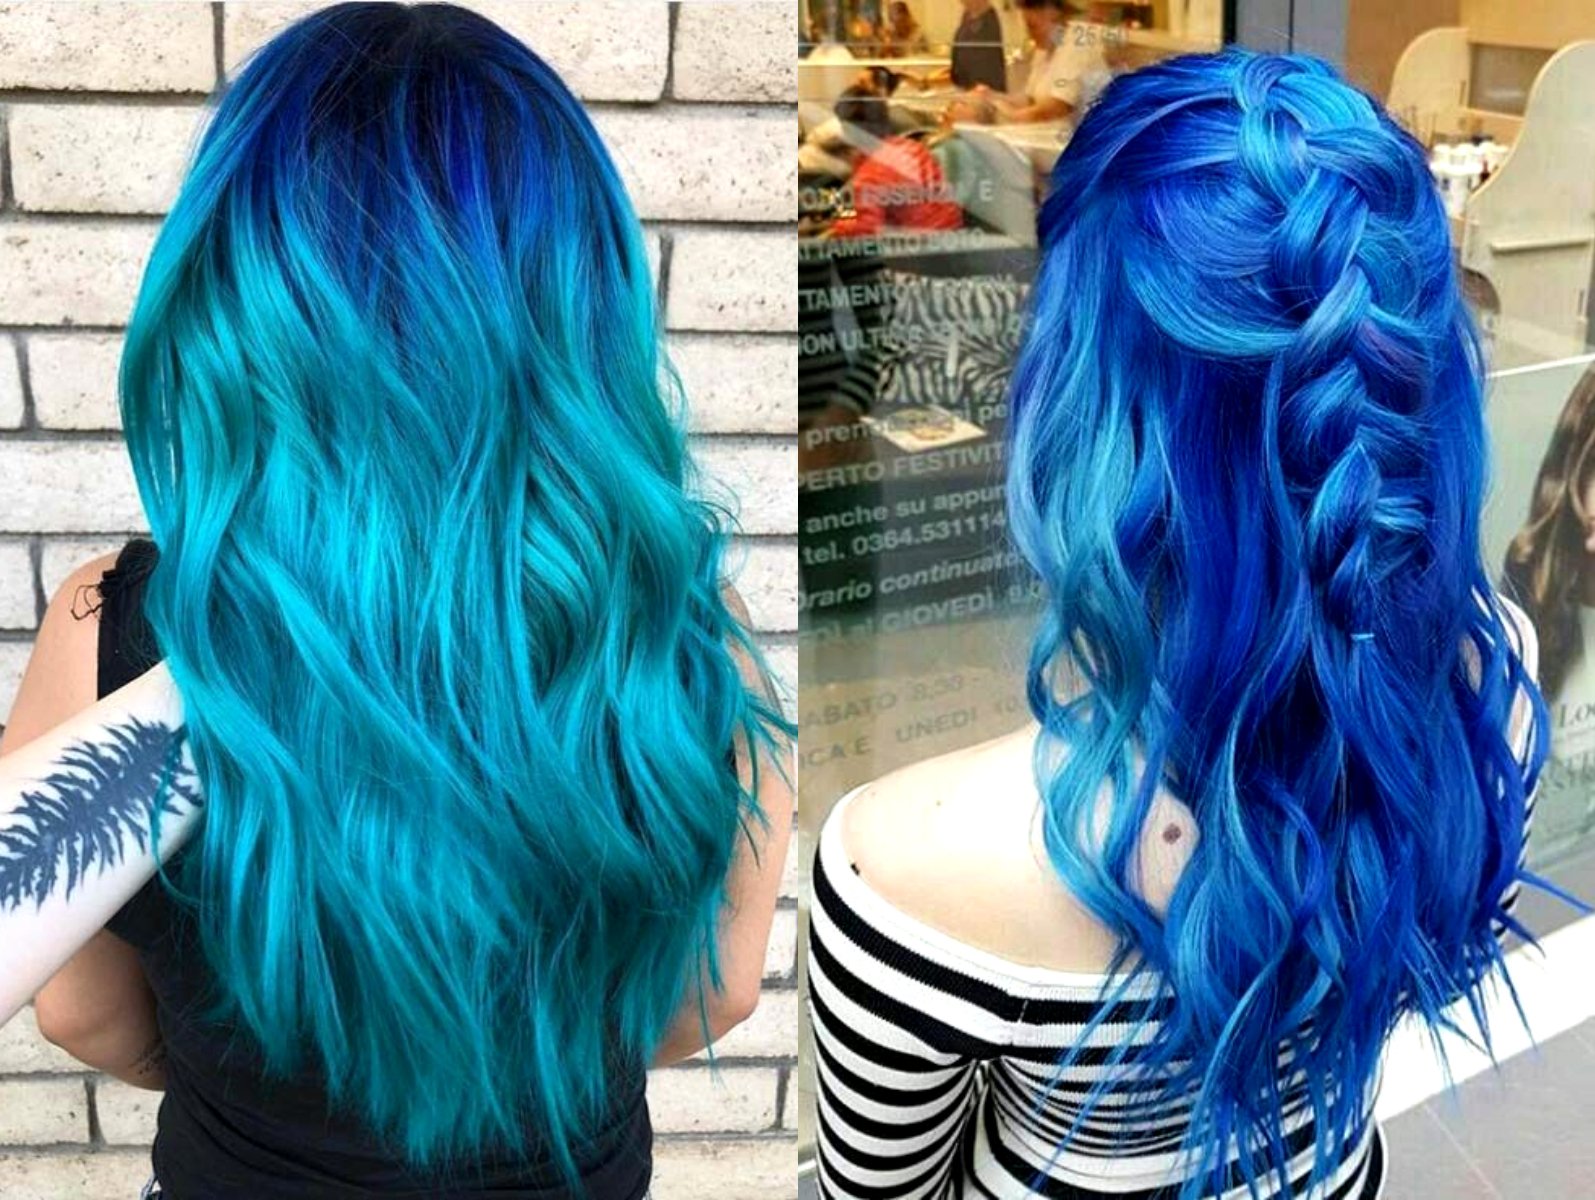 Blue balayage on medium blonde hair: Before and after - wide 8